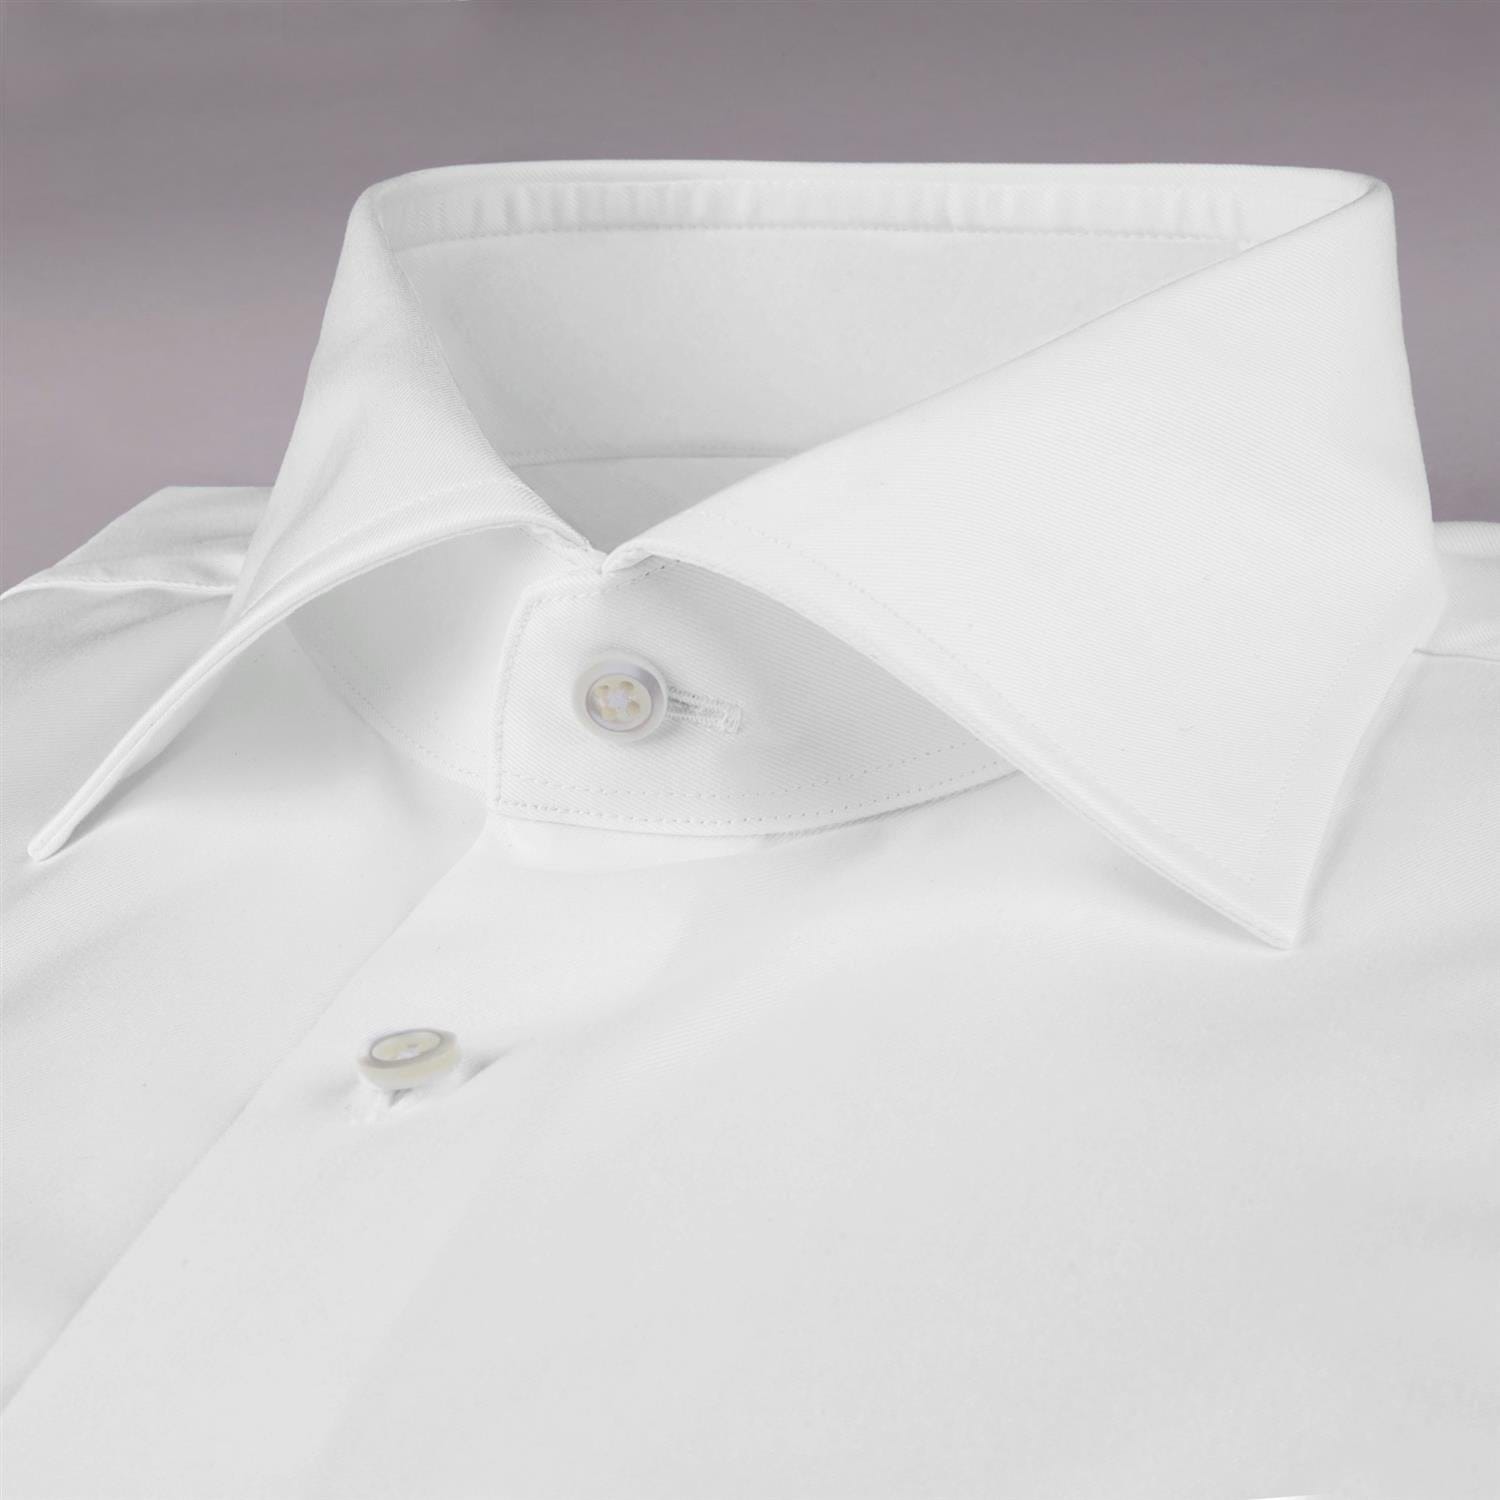 White Slimline Shirt With French Cuffs Extra Long Sleeve